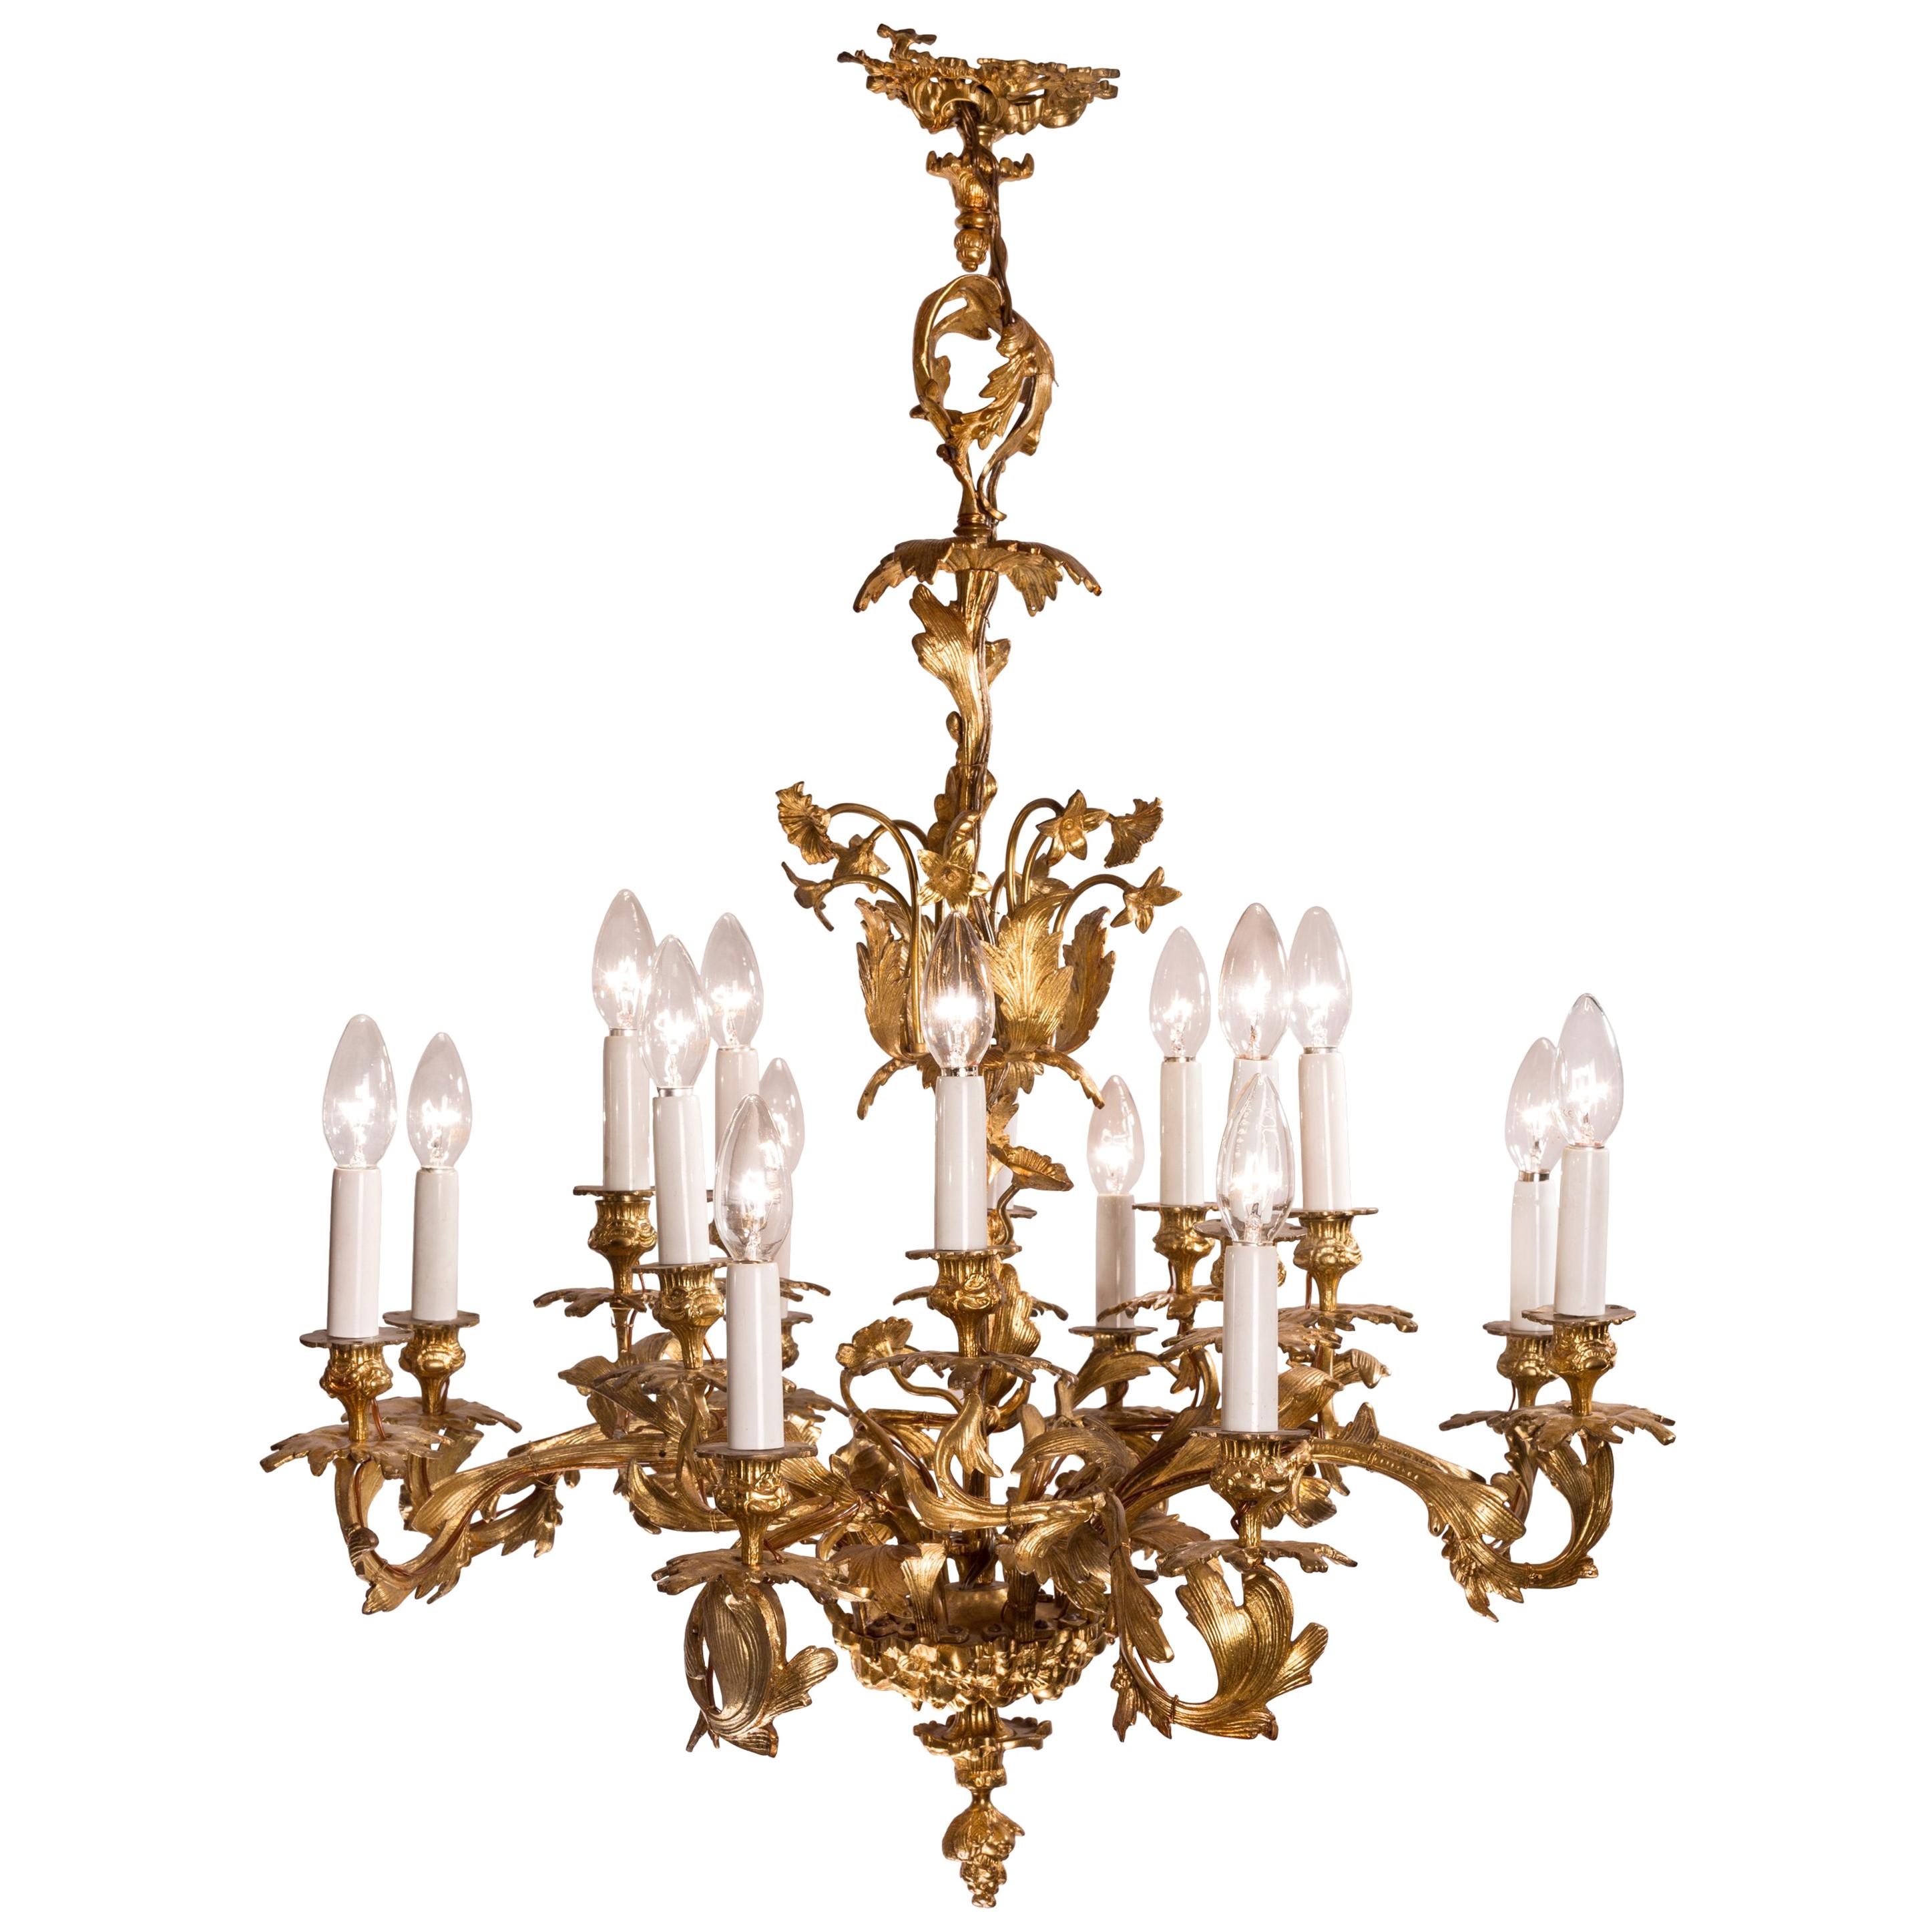 Louis XV Rococo Style 16-Light Bronze Chandelier with Leaf and Flower Motifs